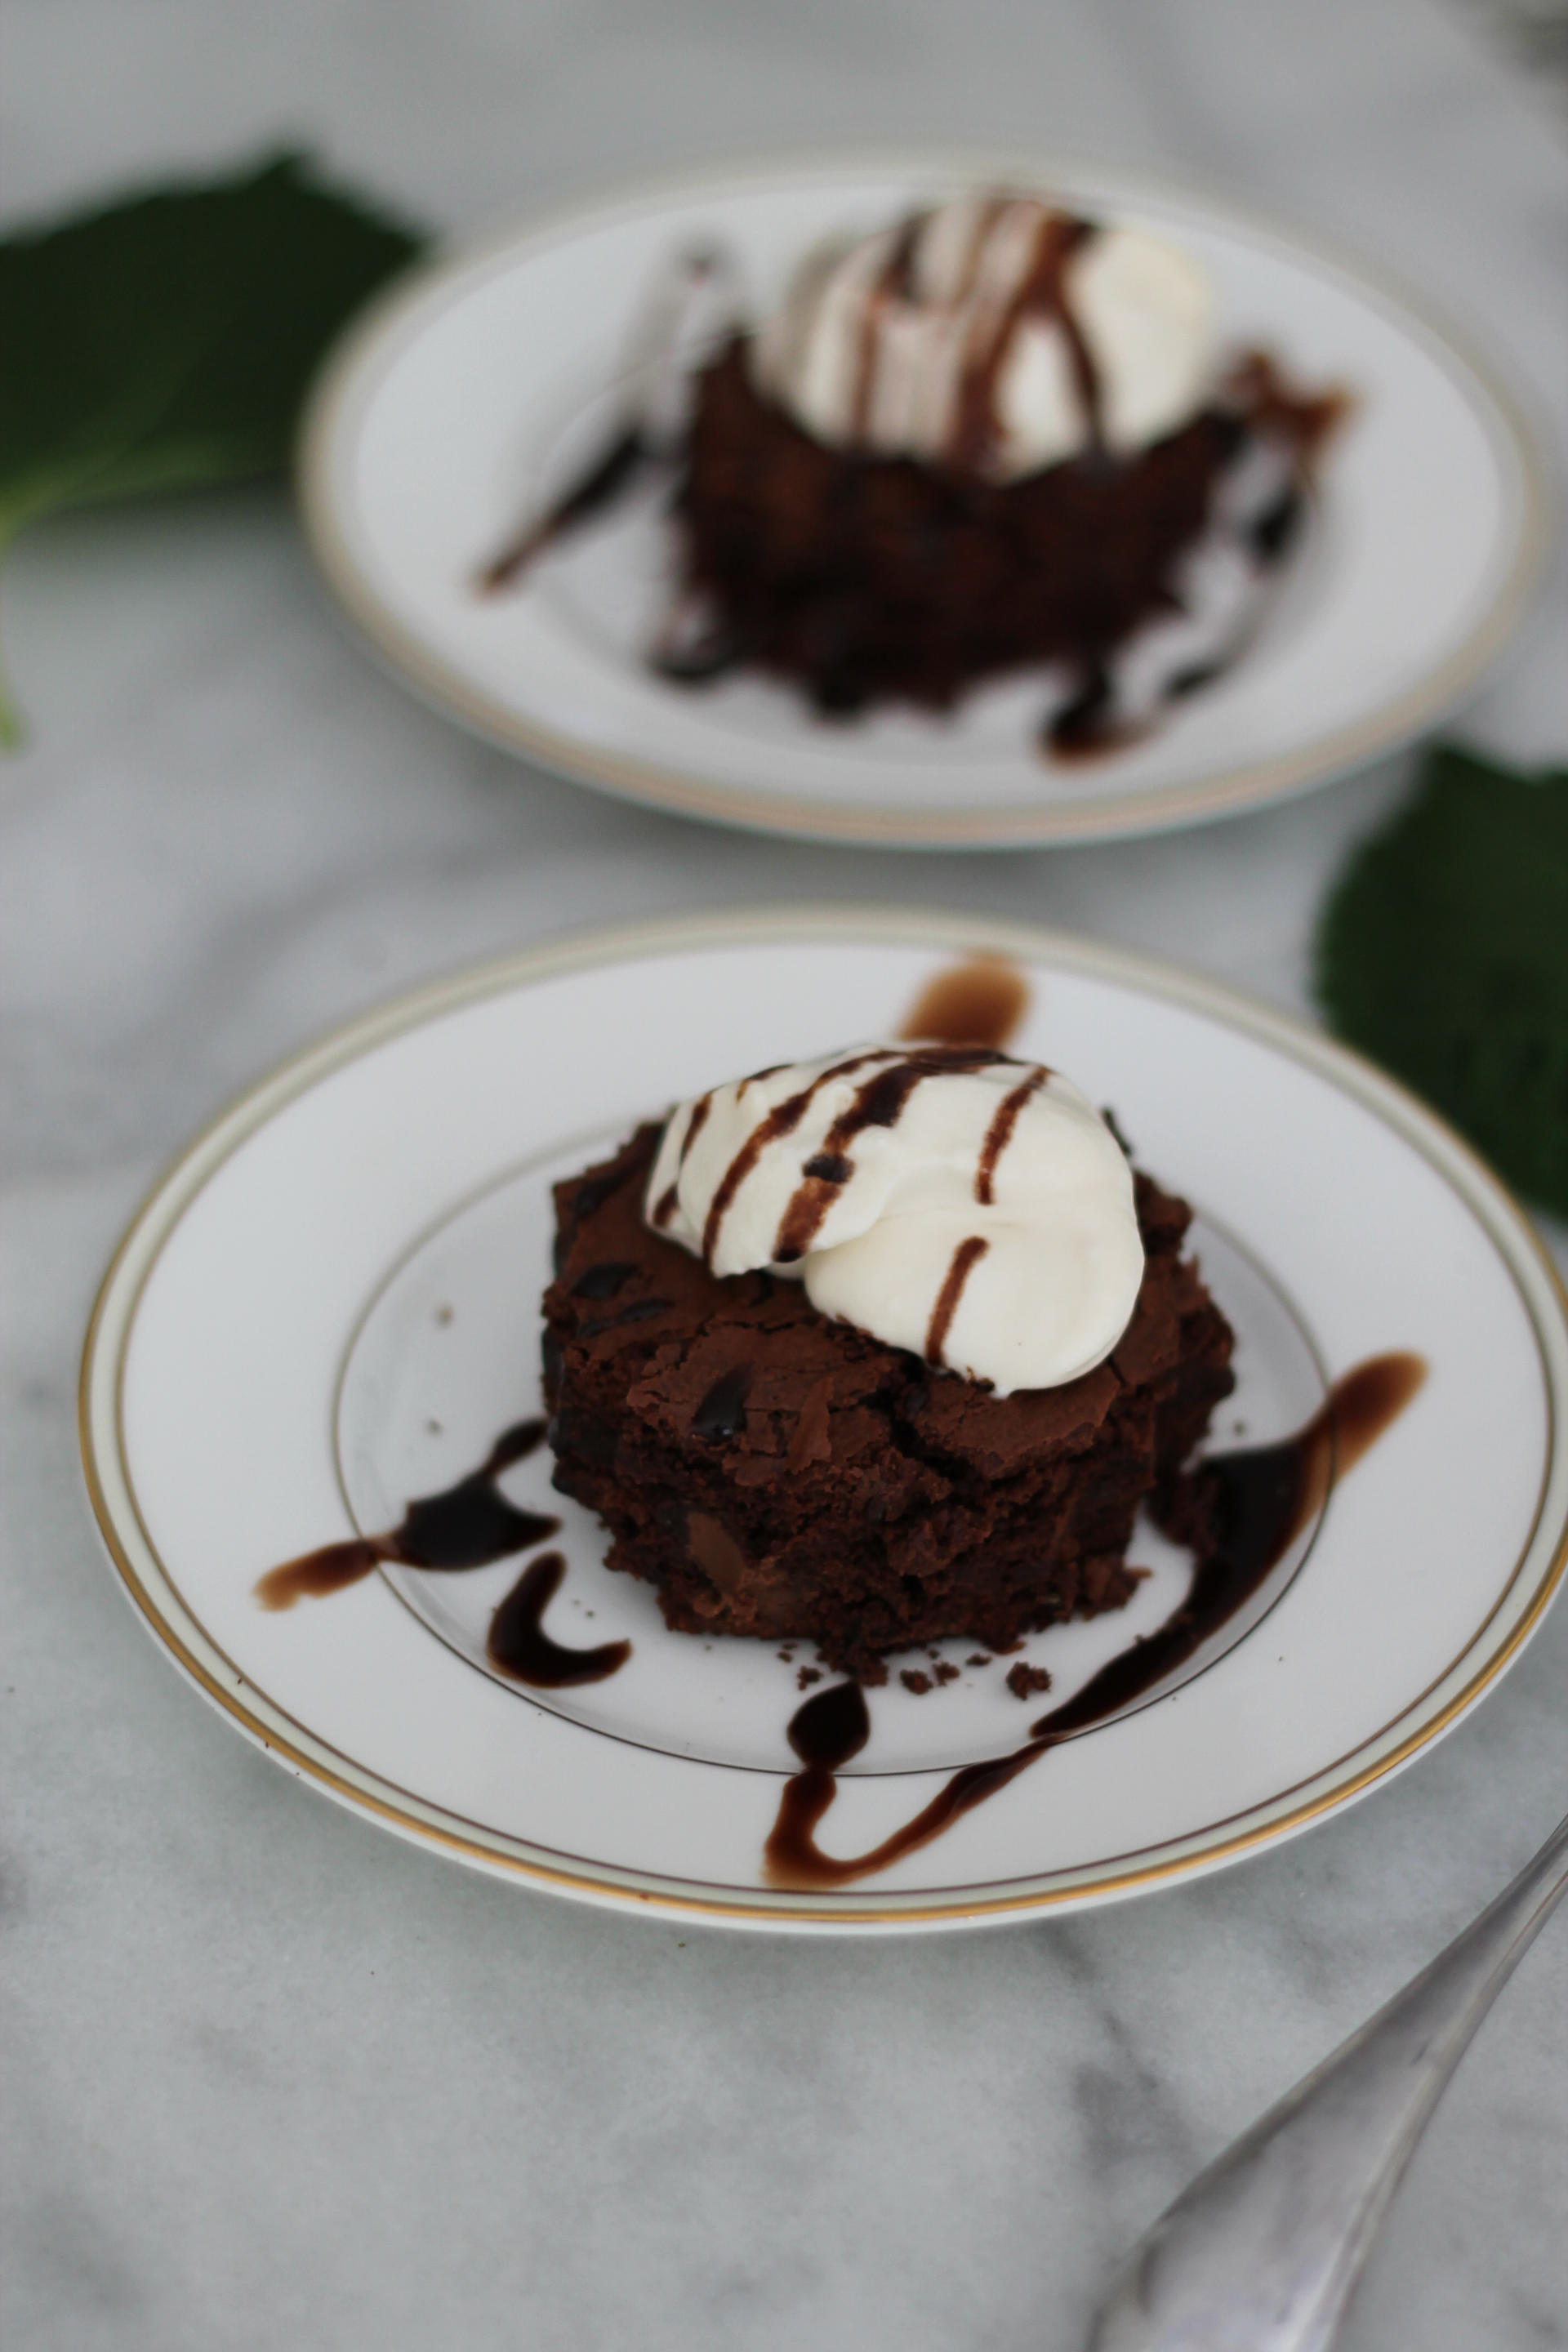 The Barefoot Contessa's Brownie Tart With Salted Caramel Whipped Cream